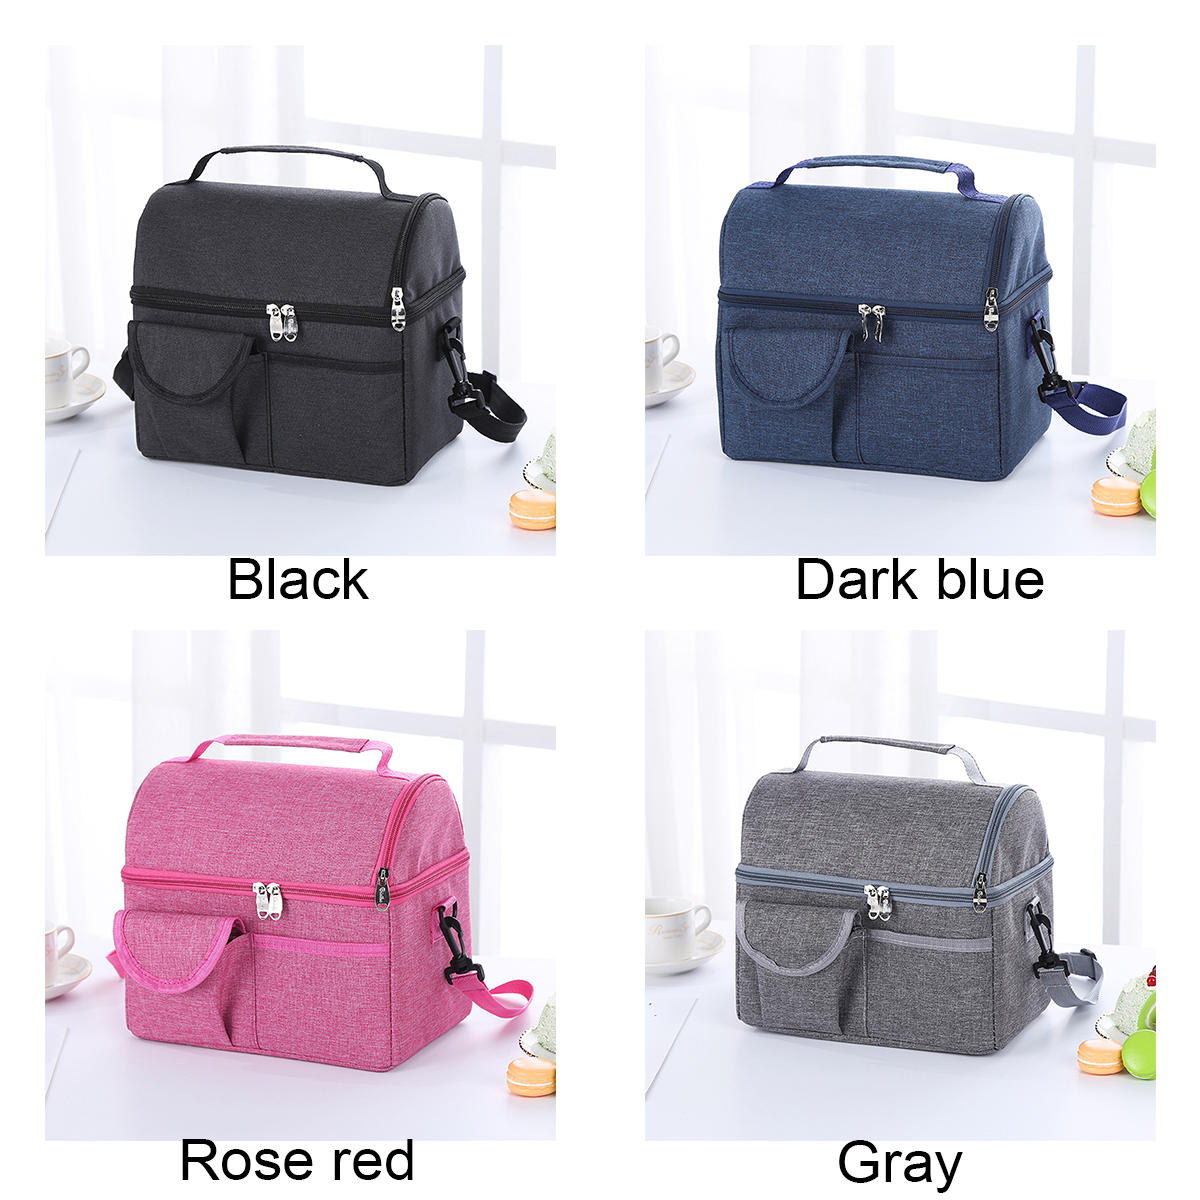 Portable-Insulated-Food-Lunch-Bag-Cooler-Box-Picnic-Bag-Travel-Carry-Tote-Shoulder-Bag-1651523-9